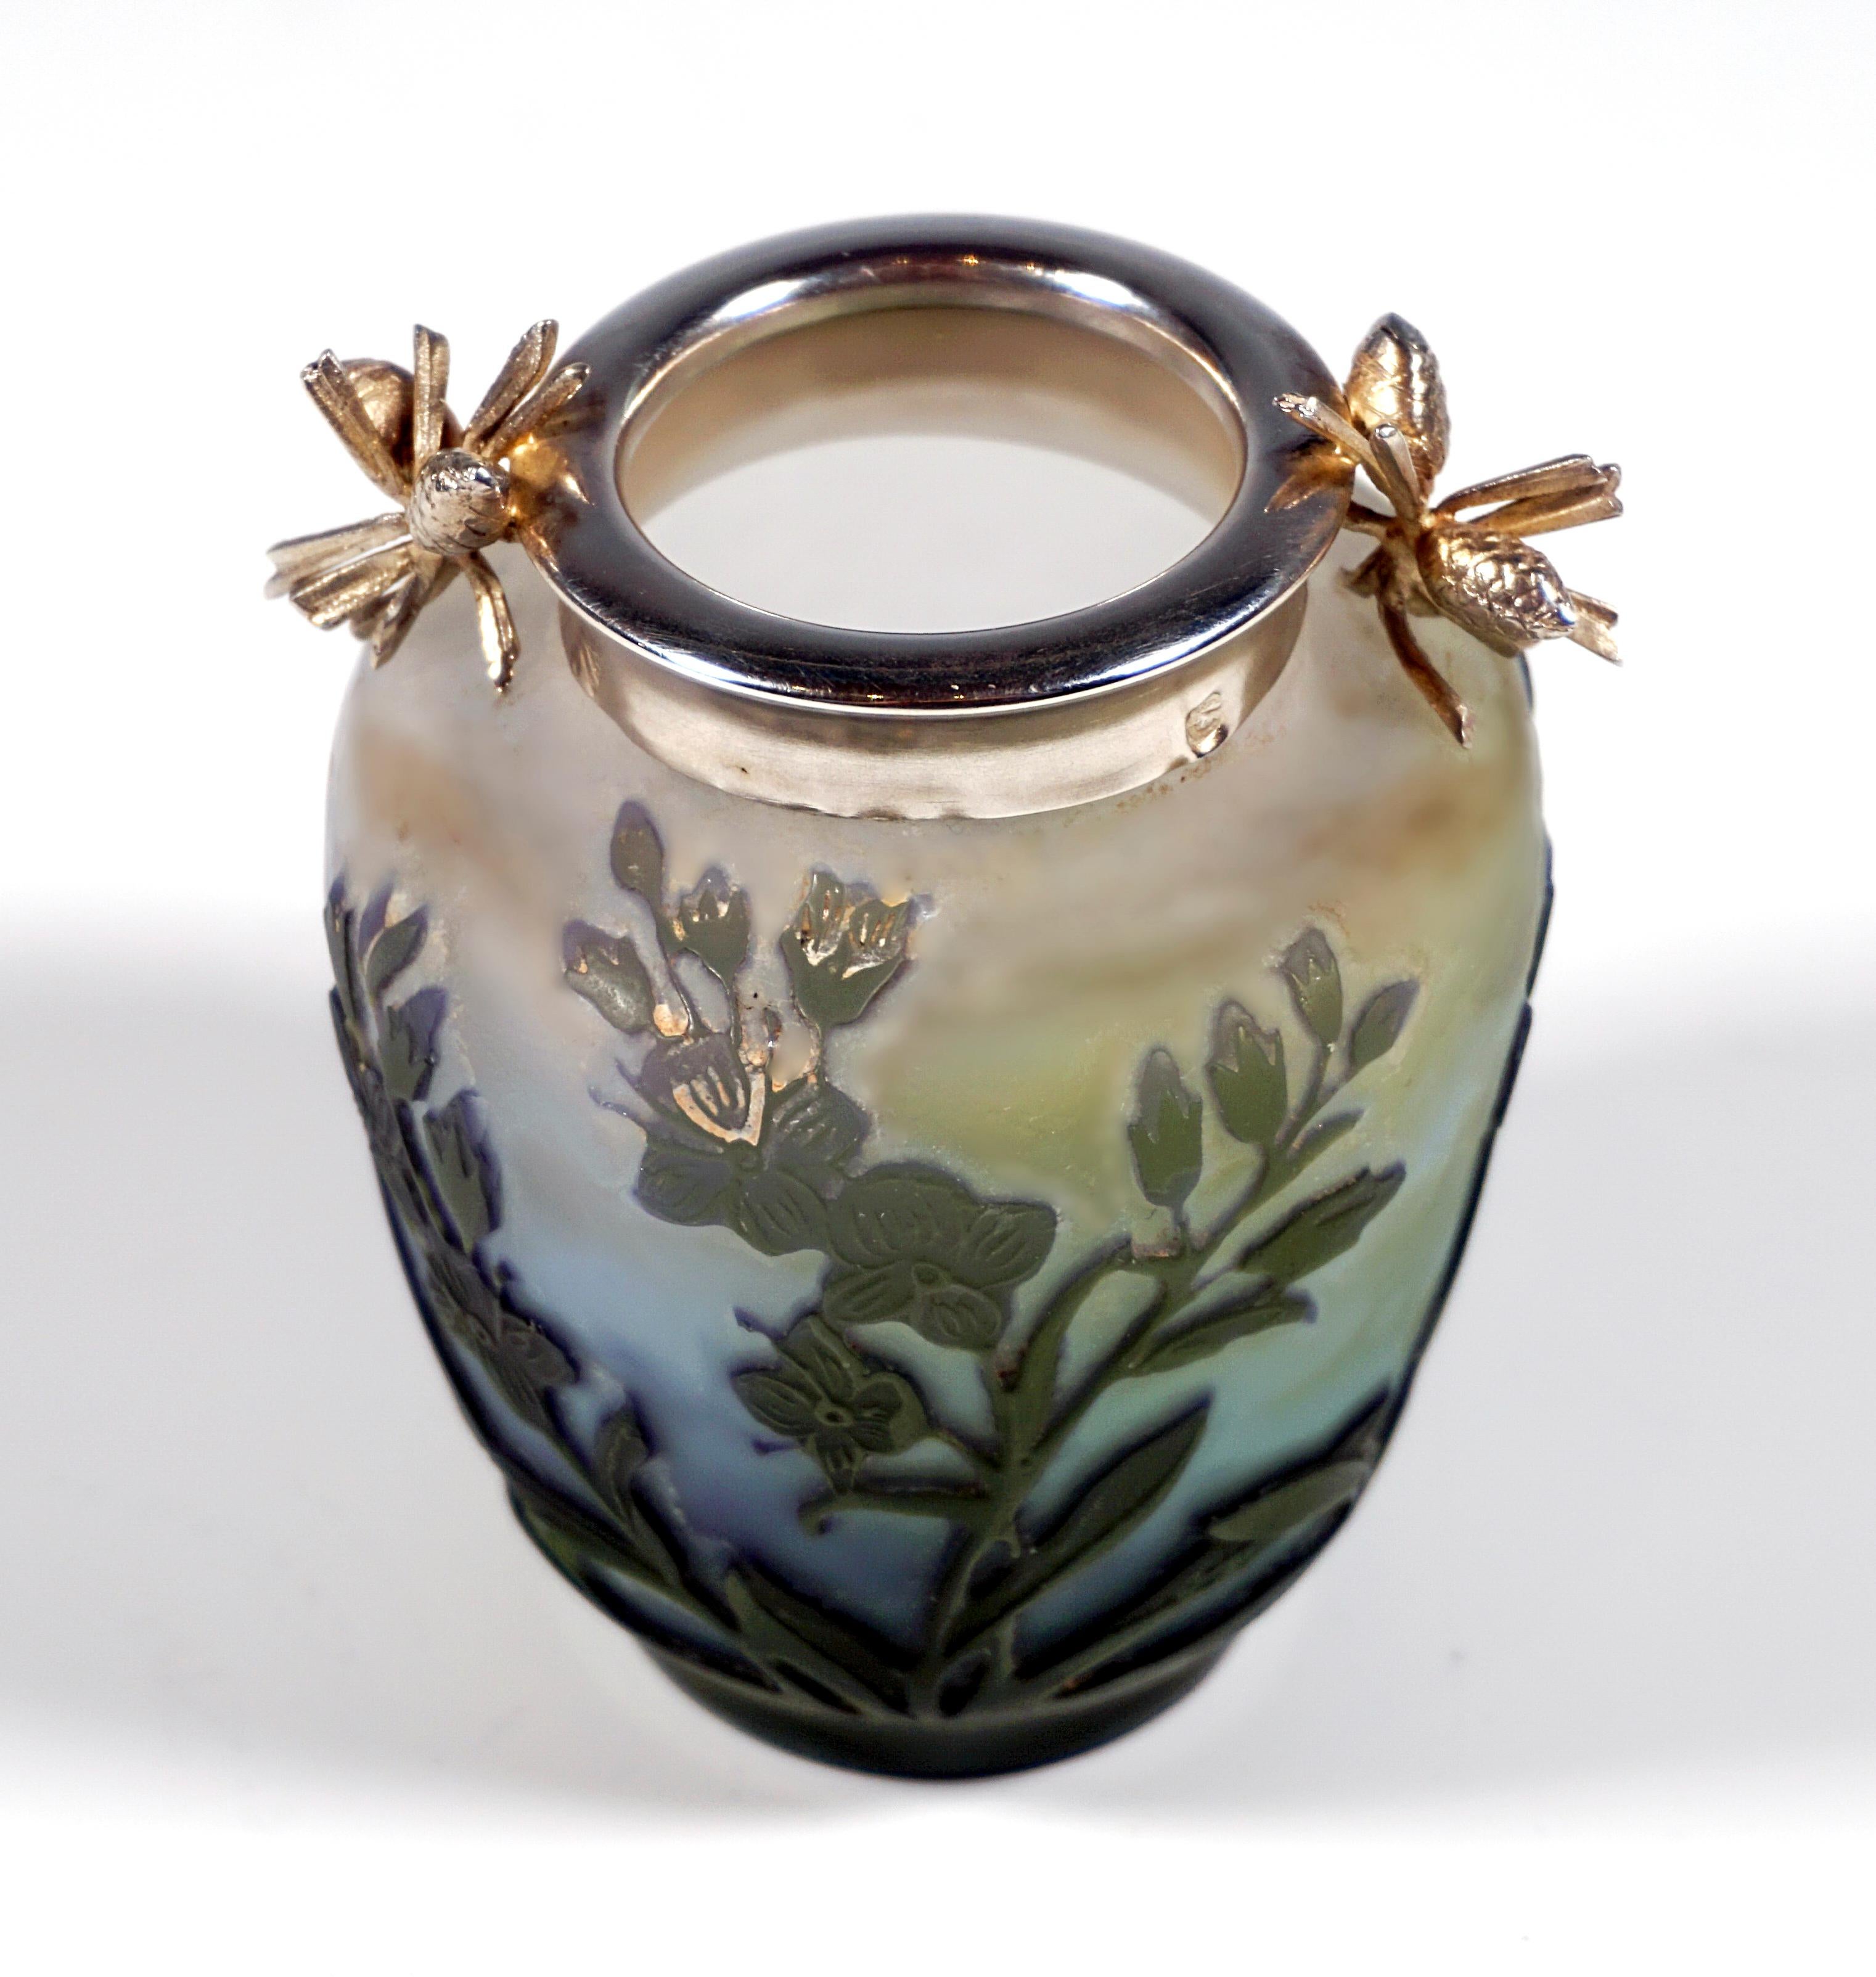 Early 20th Century Émile Gallé Art Nouveau Cameo Vase With Silver Mounting, Nancy, France 1904 For Sale